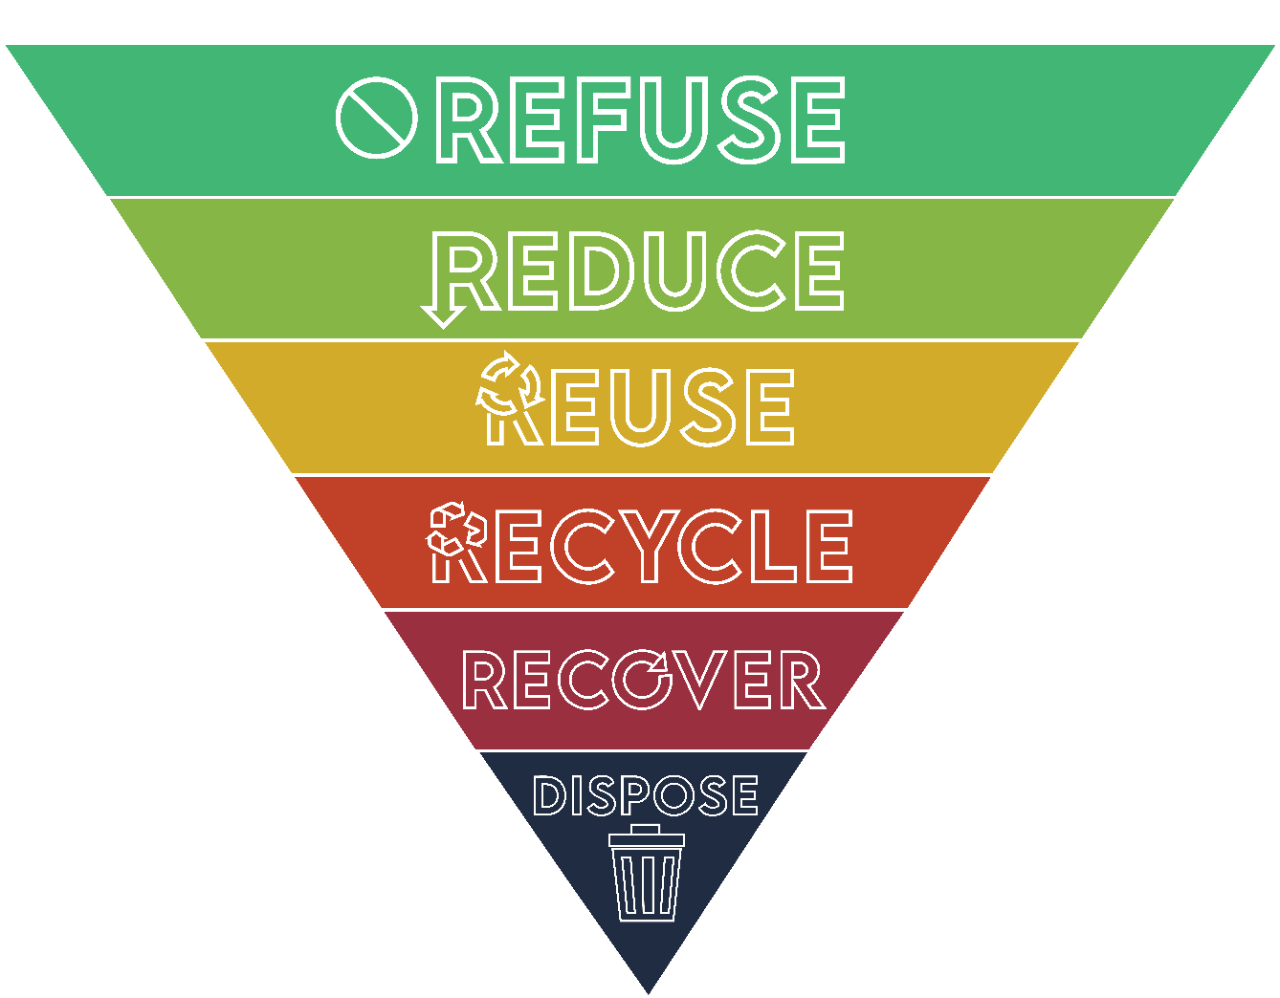 Waste Pyramid - Refuse, Reduce, Reuse, Recycle, Recover, Dispose